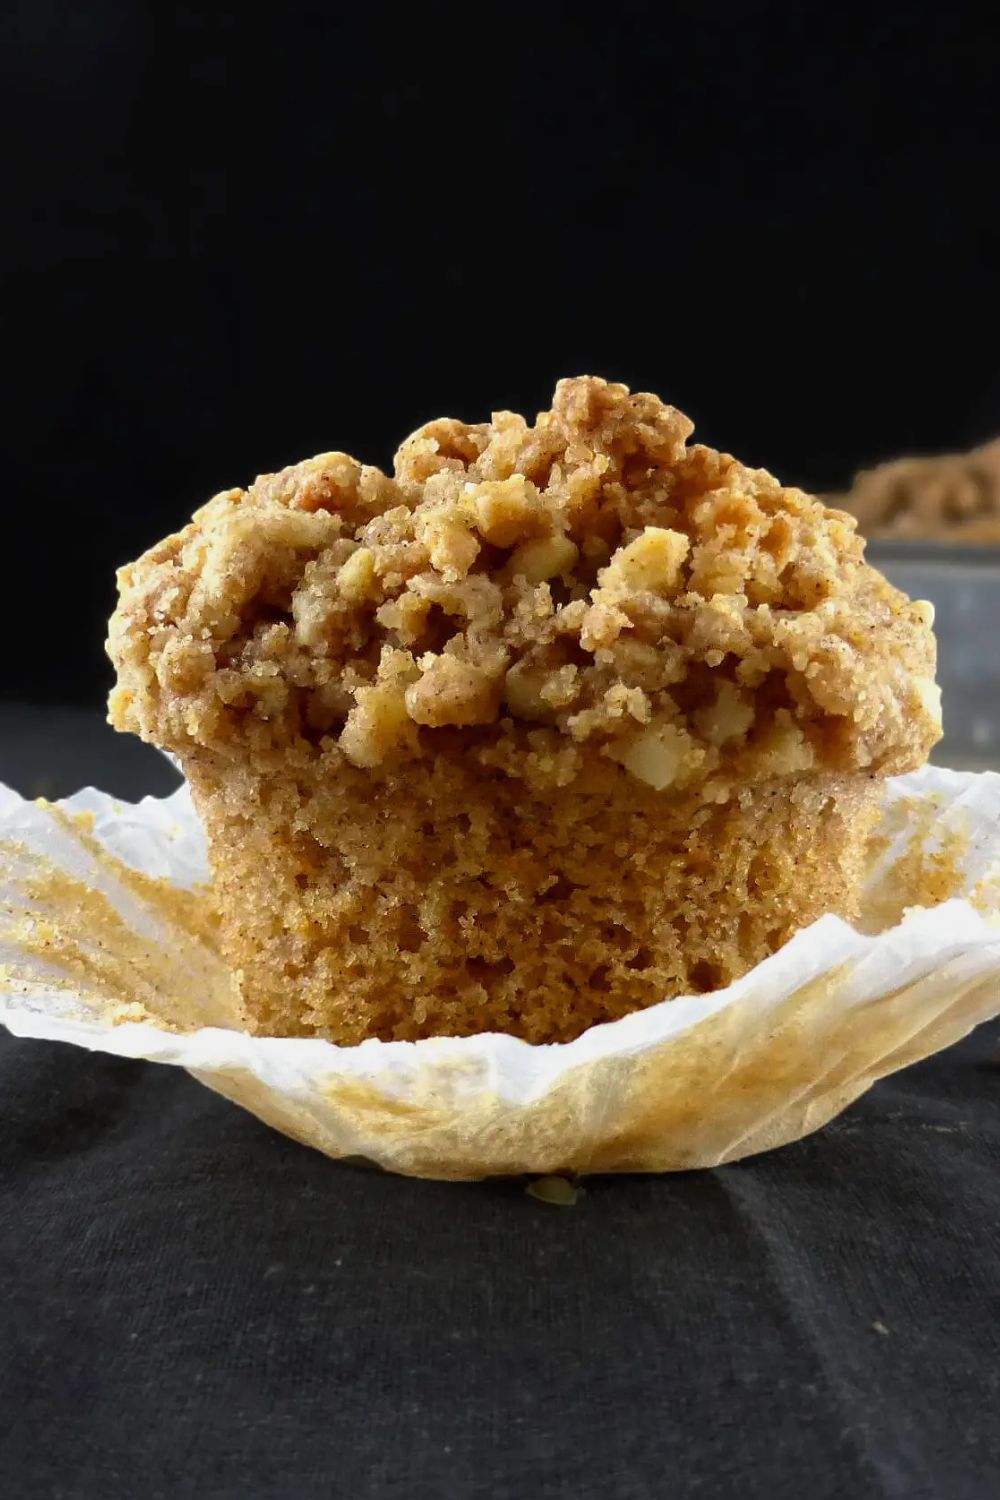 Cinnamon Spelt Muffins with an Almond Streusel Topping